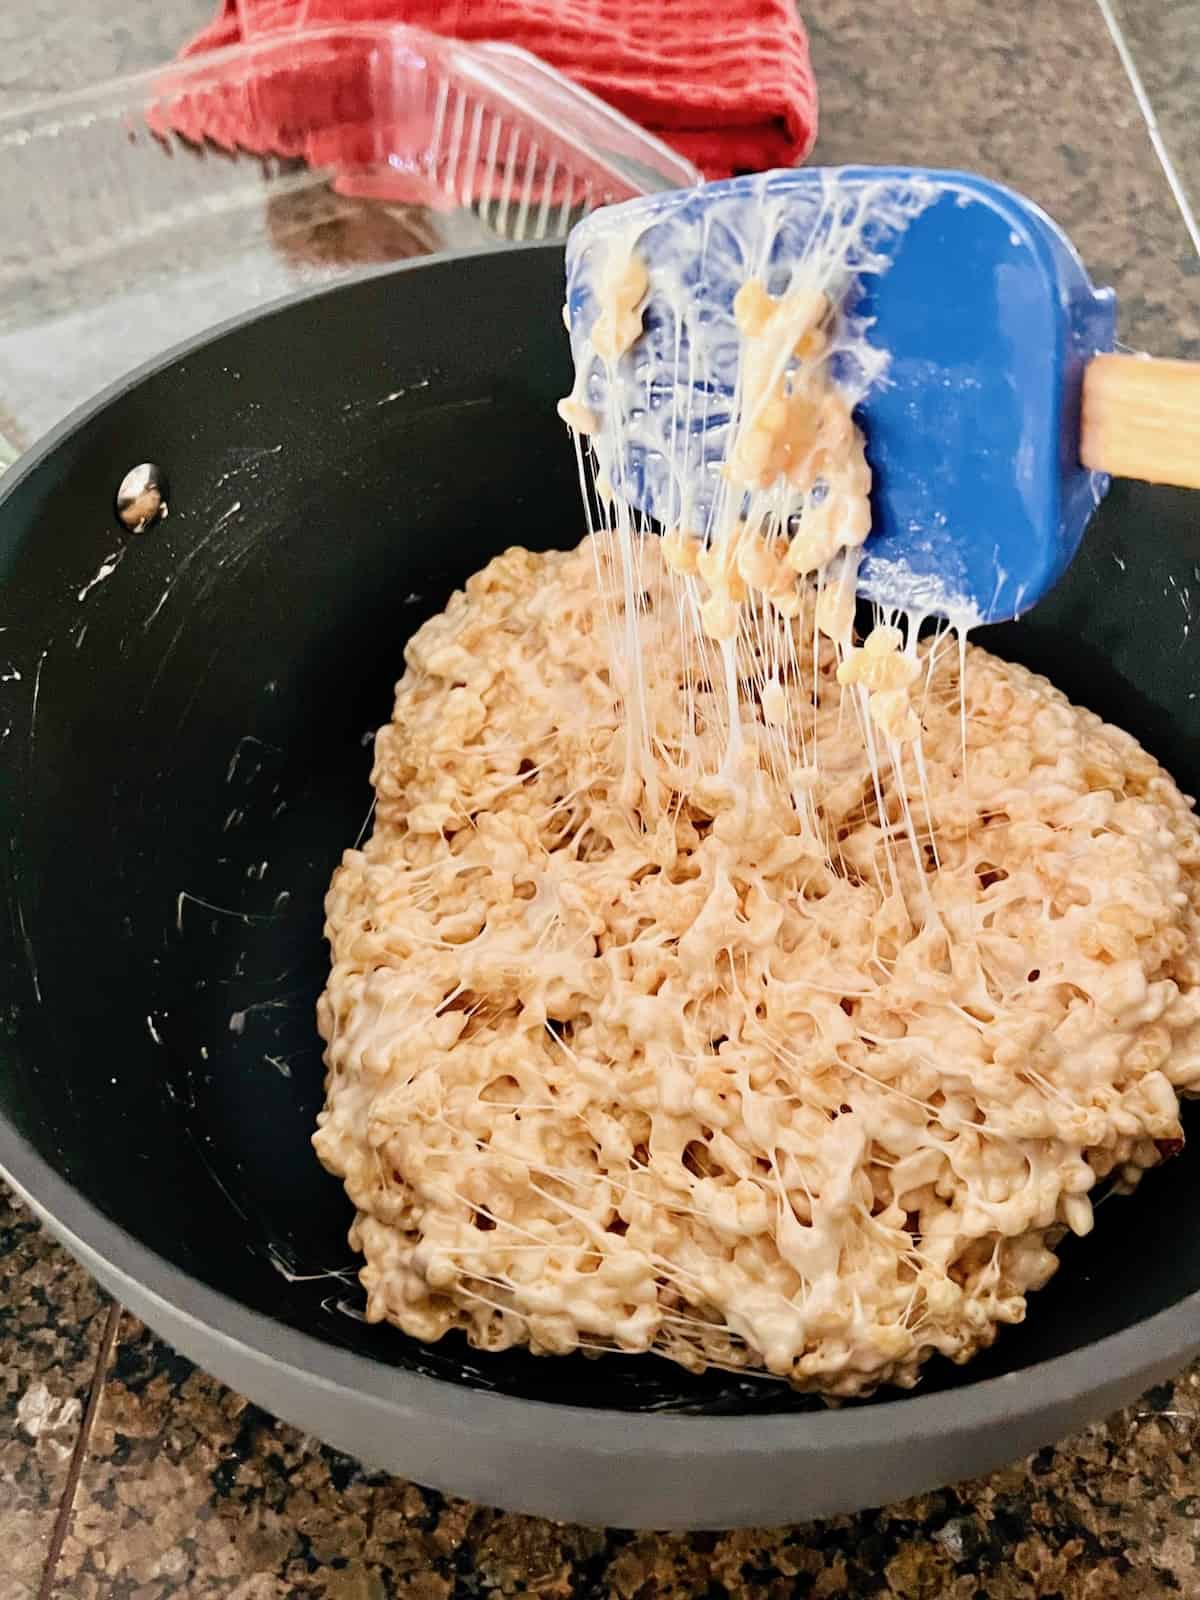 Rice krispies added to melted marshmallow and stretching from the pot to the spatula.